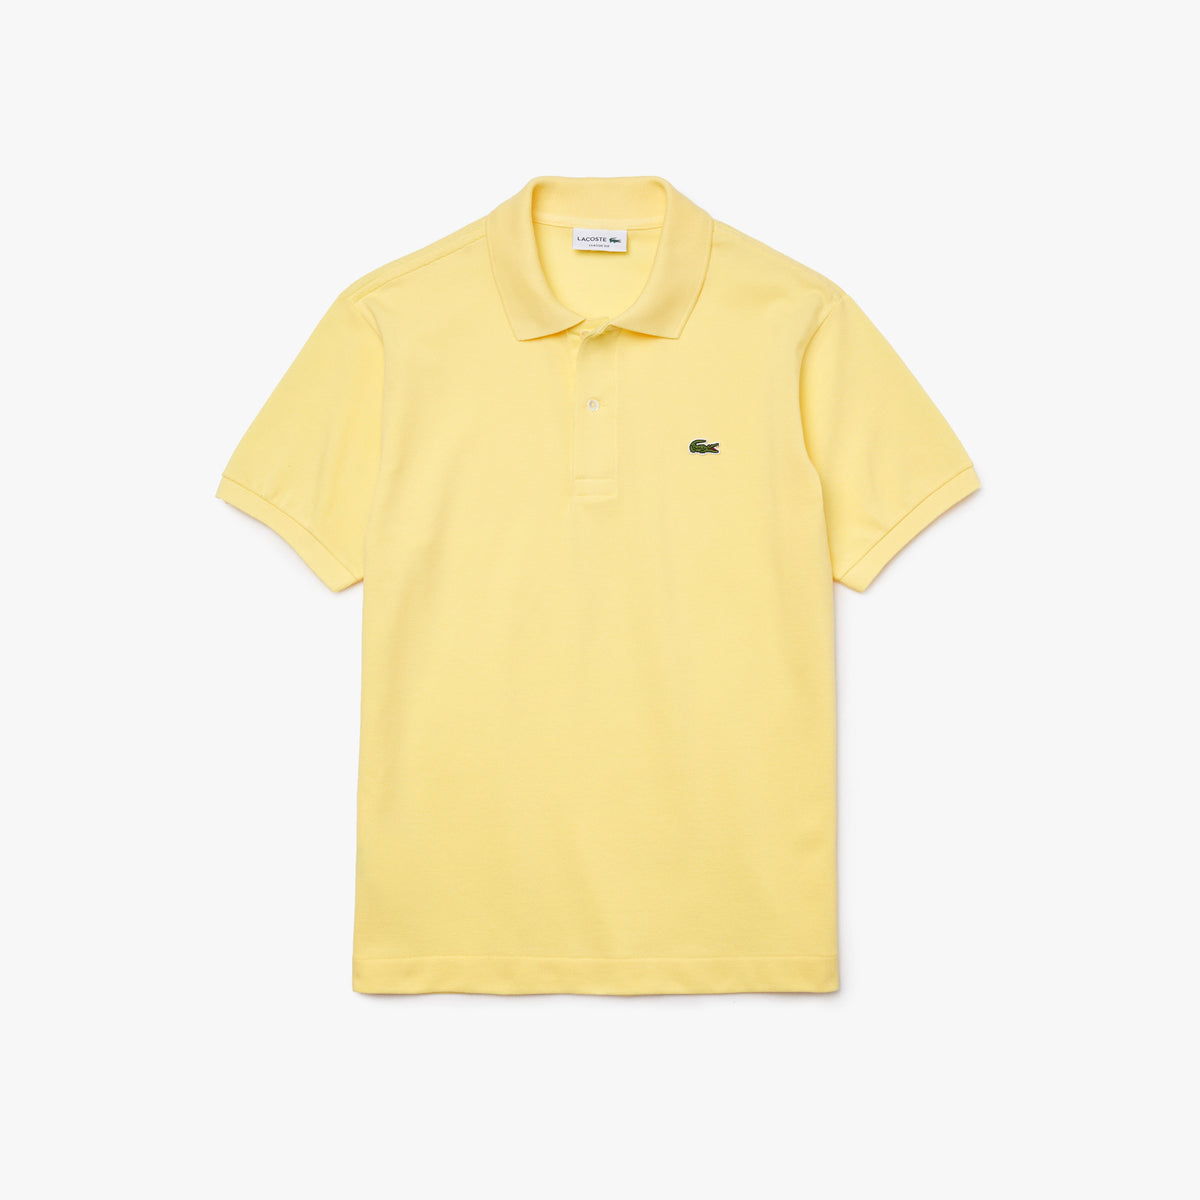 Lacoste - Classic Fit Polo Shirt - Yellow 107